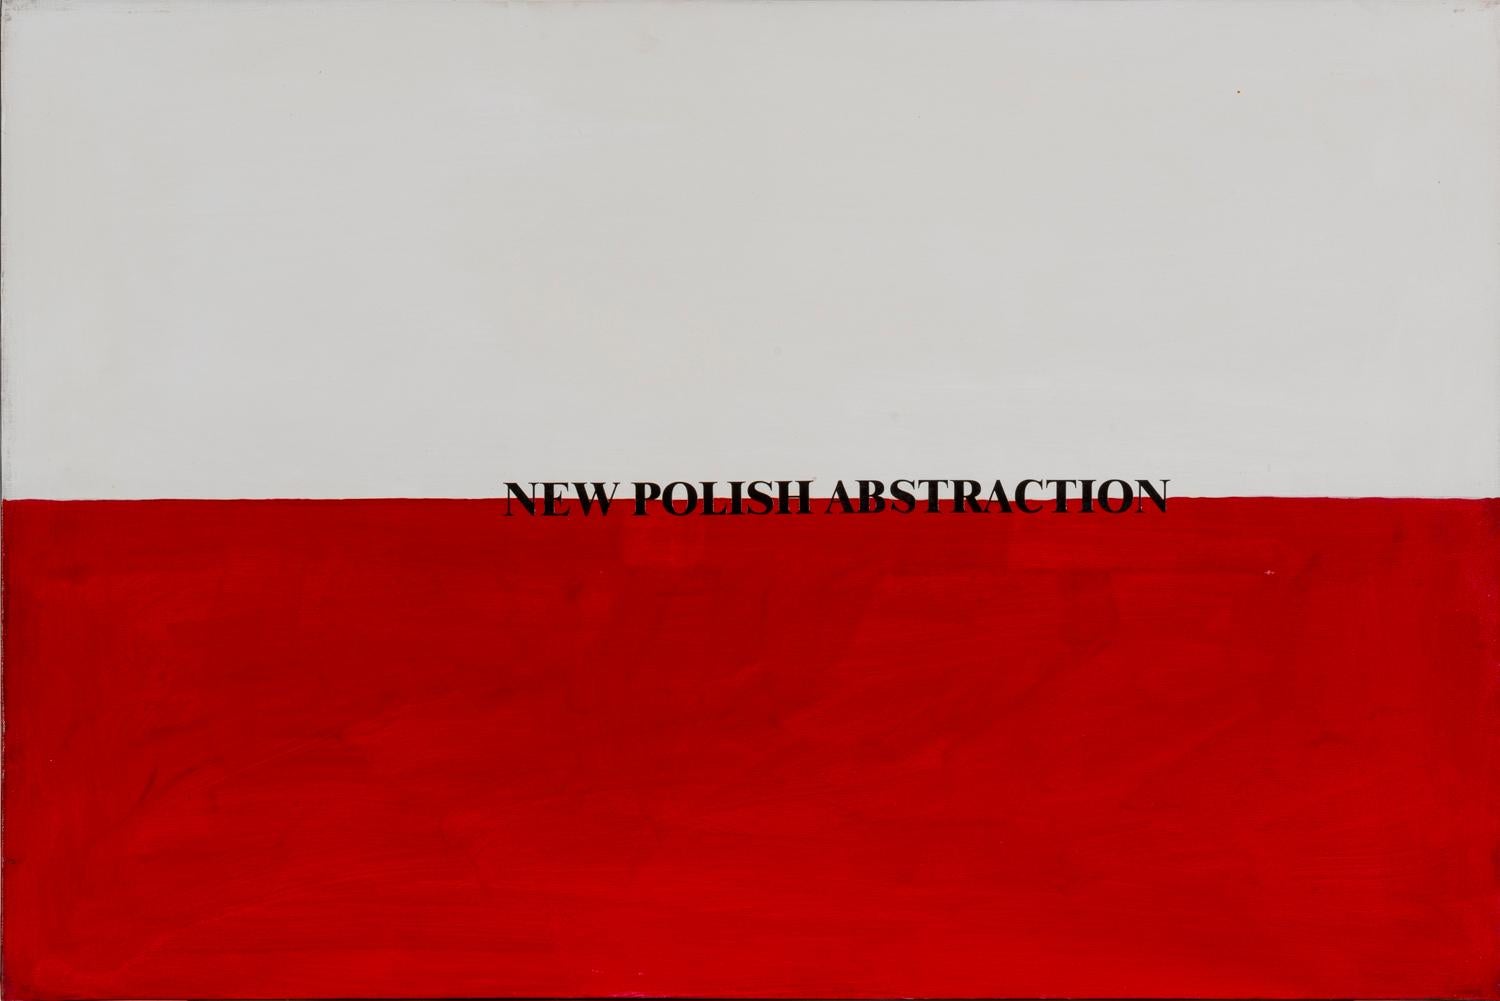 New Polish Abstraction, 1972-2002, Acrylic on canvas, Flags, Visual Poetry - Painting by Sarenco